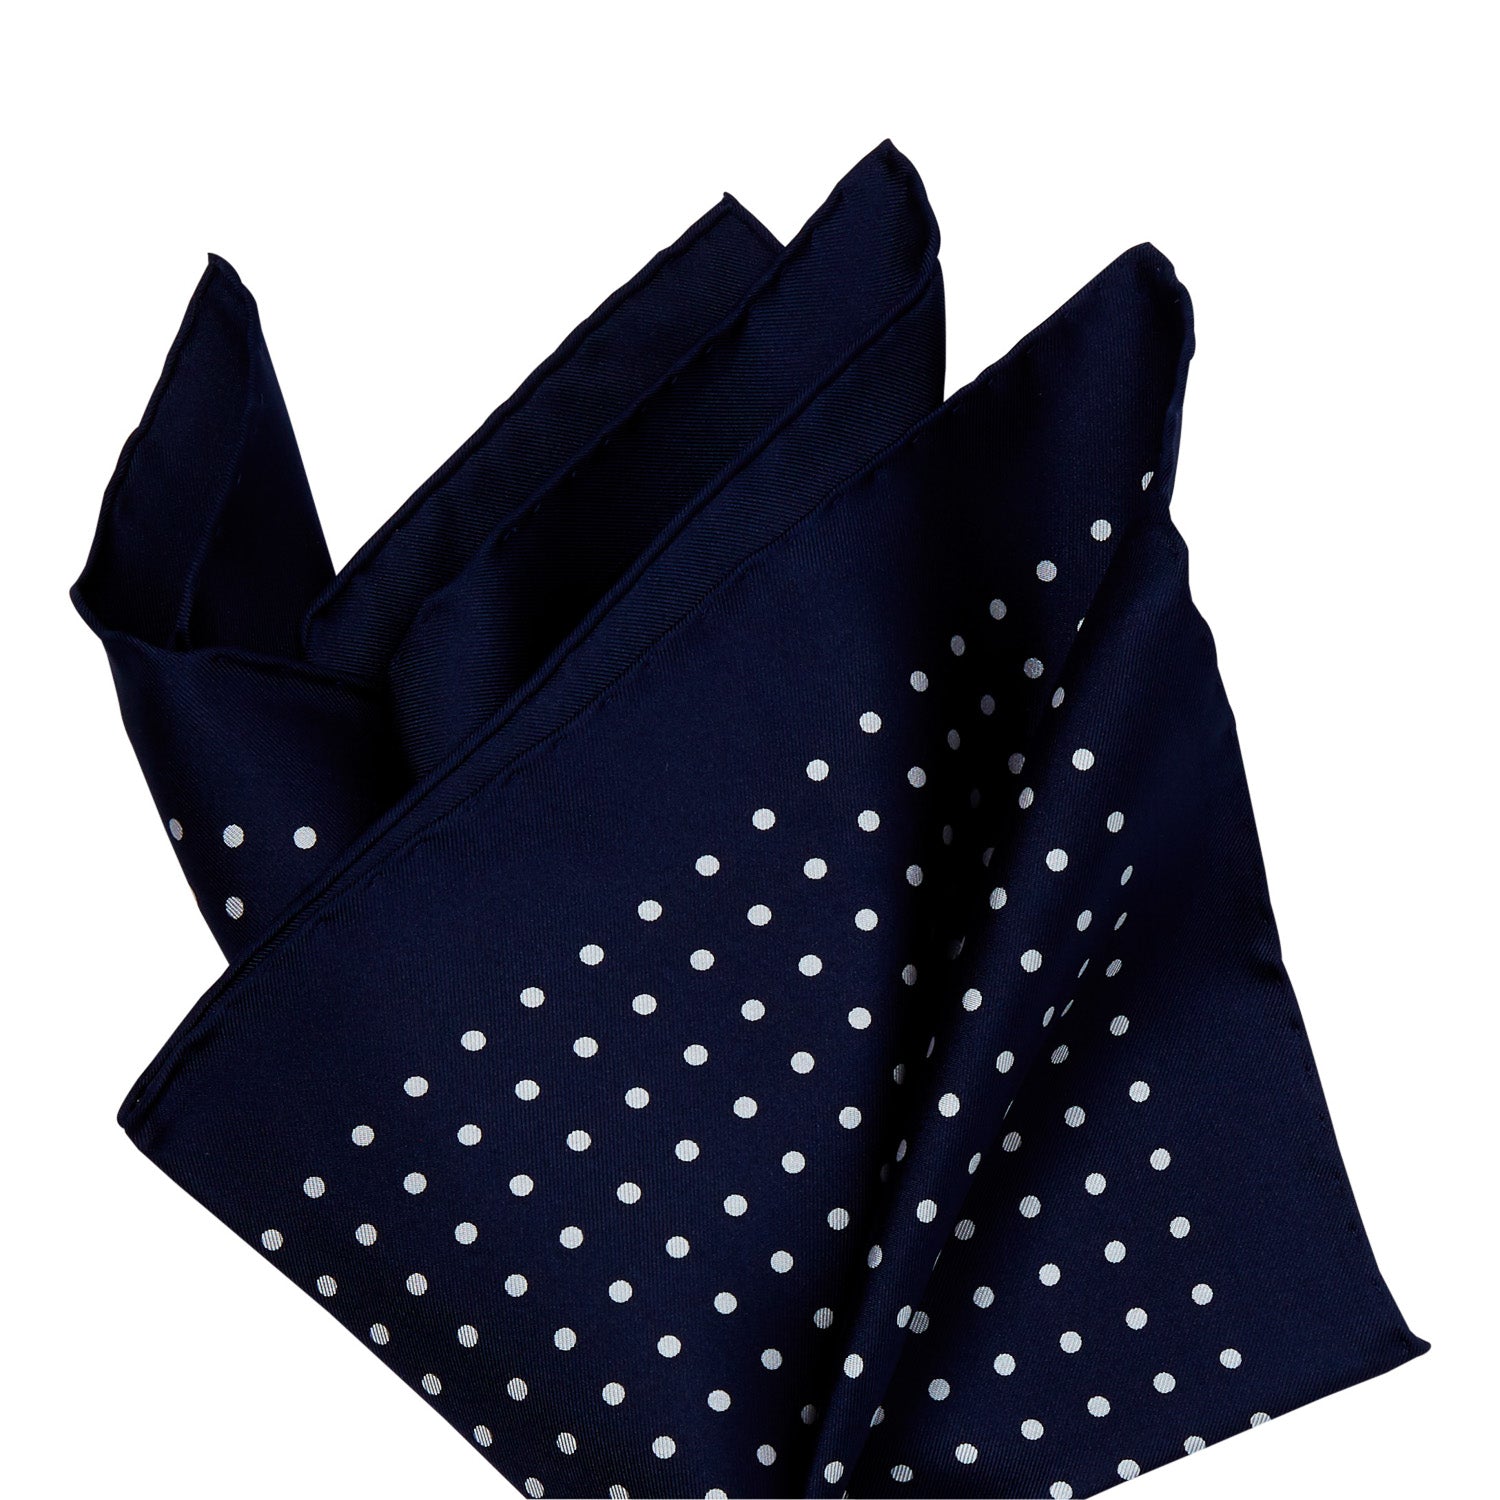 The Sovereign Grade 100% Silk Navy London Dot Pocket Square by KirbyAllison.com is ideal for formal outfits.